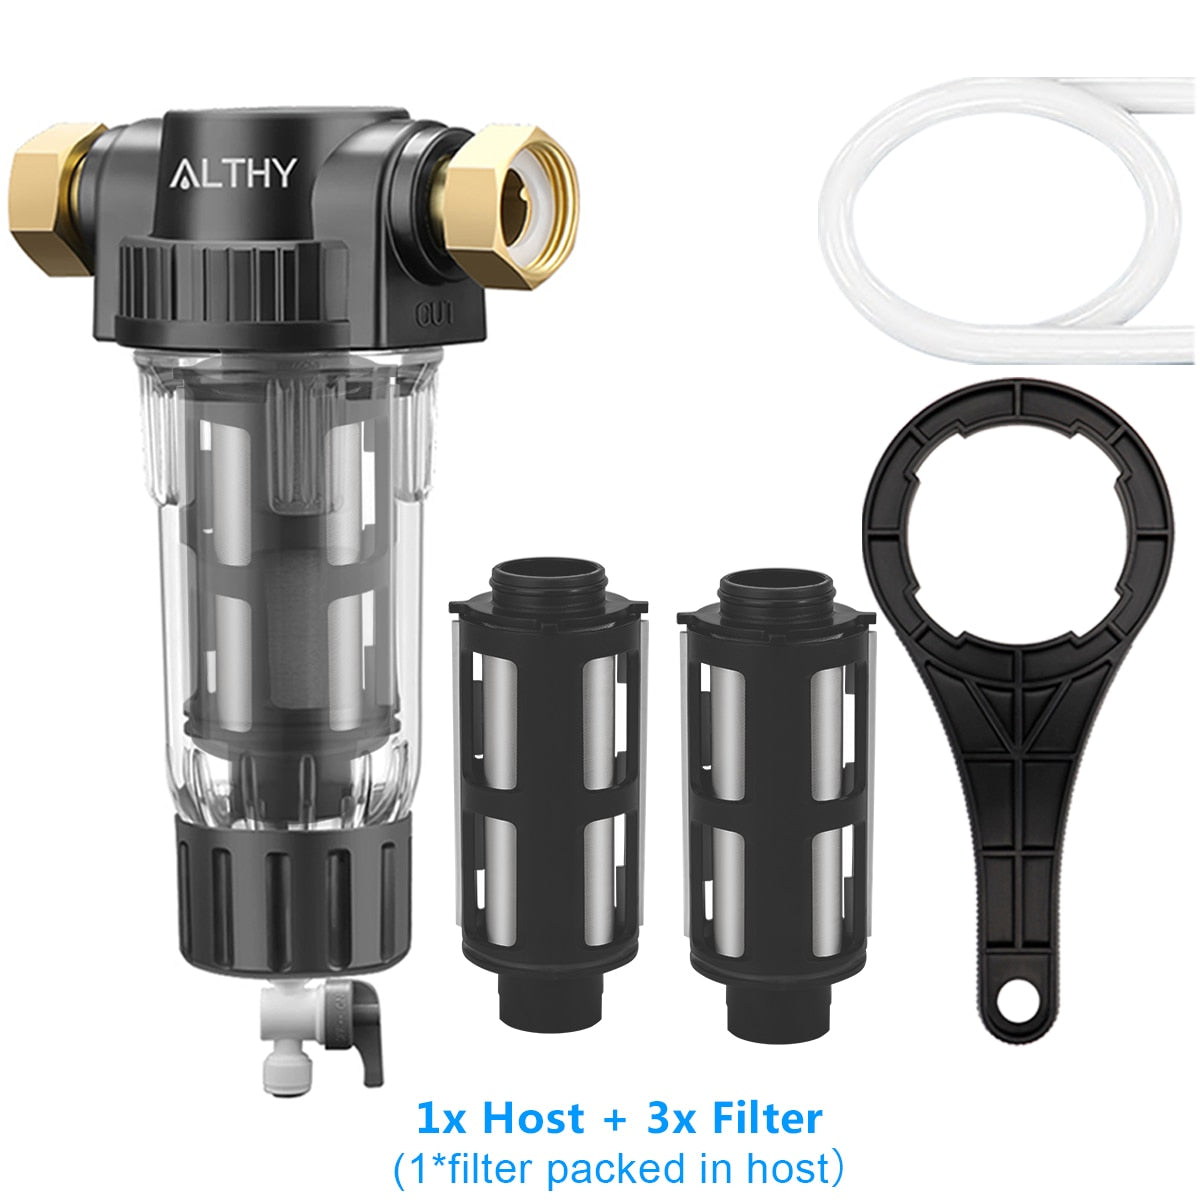 ALTHY Pre filter Whole House Spin Down Sediment Water Filter Central Prefilter Purifier System Backwash Stainless Steel Mesh Hostand3xFilterChina Hardware > Plumbing > Water Dispensing & Filtration 184.99 EZYSELLA SHOP